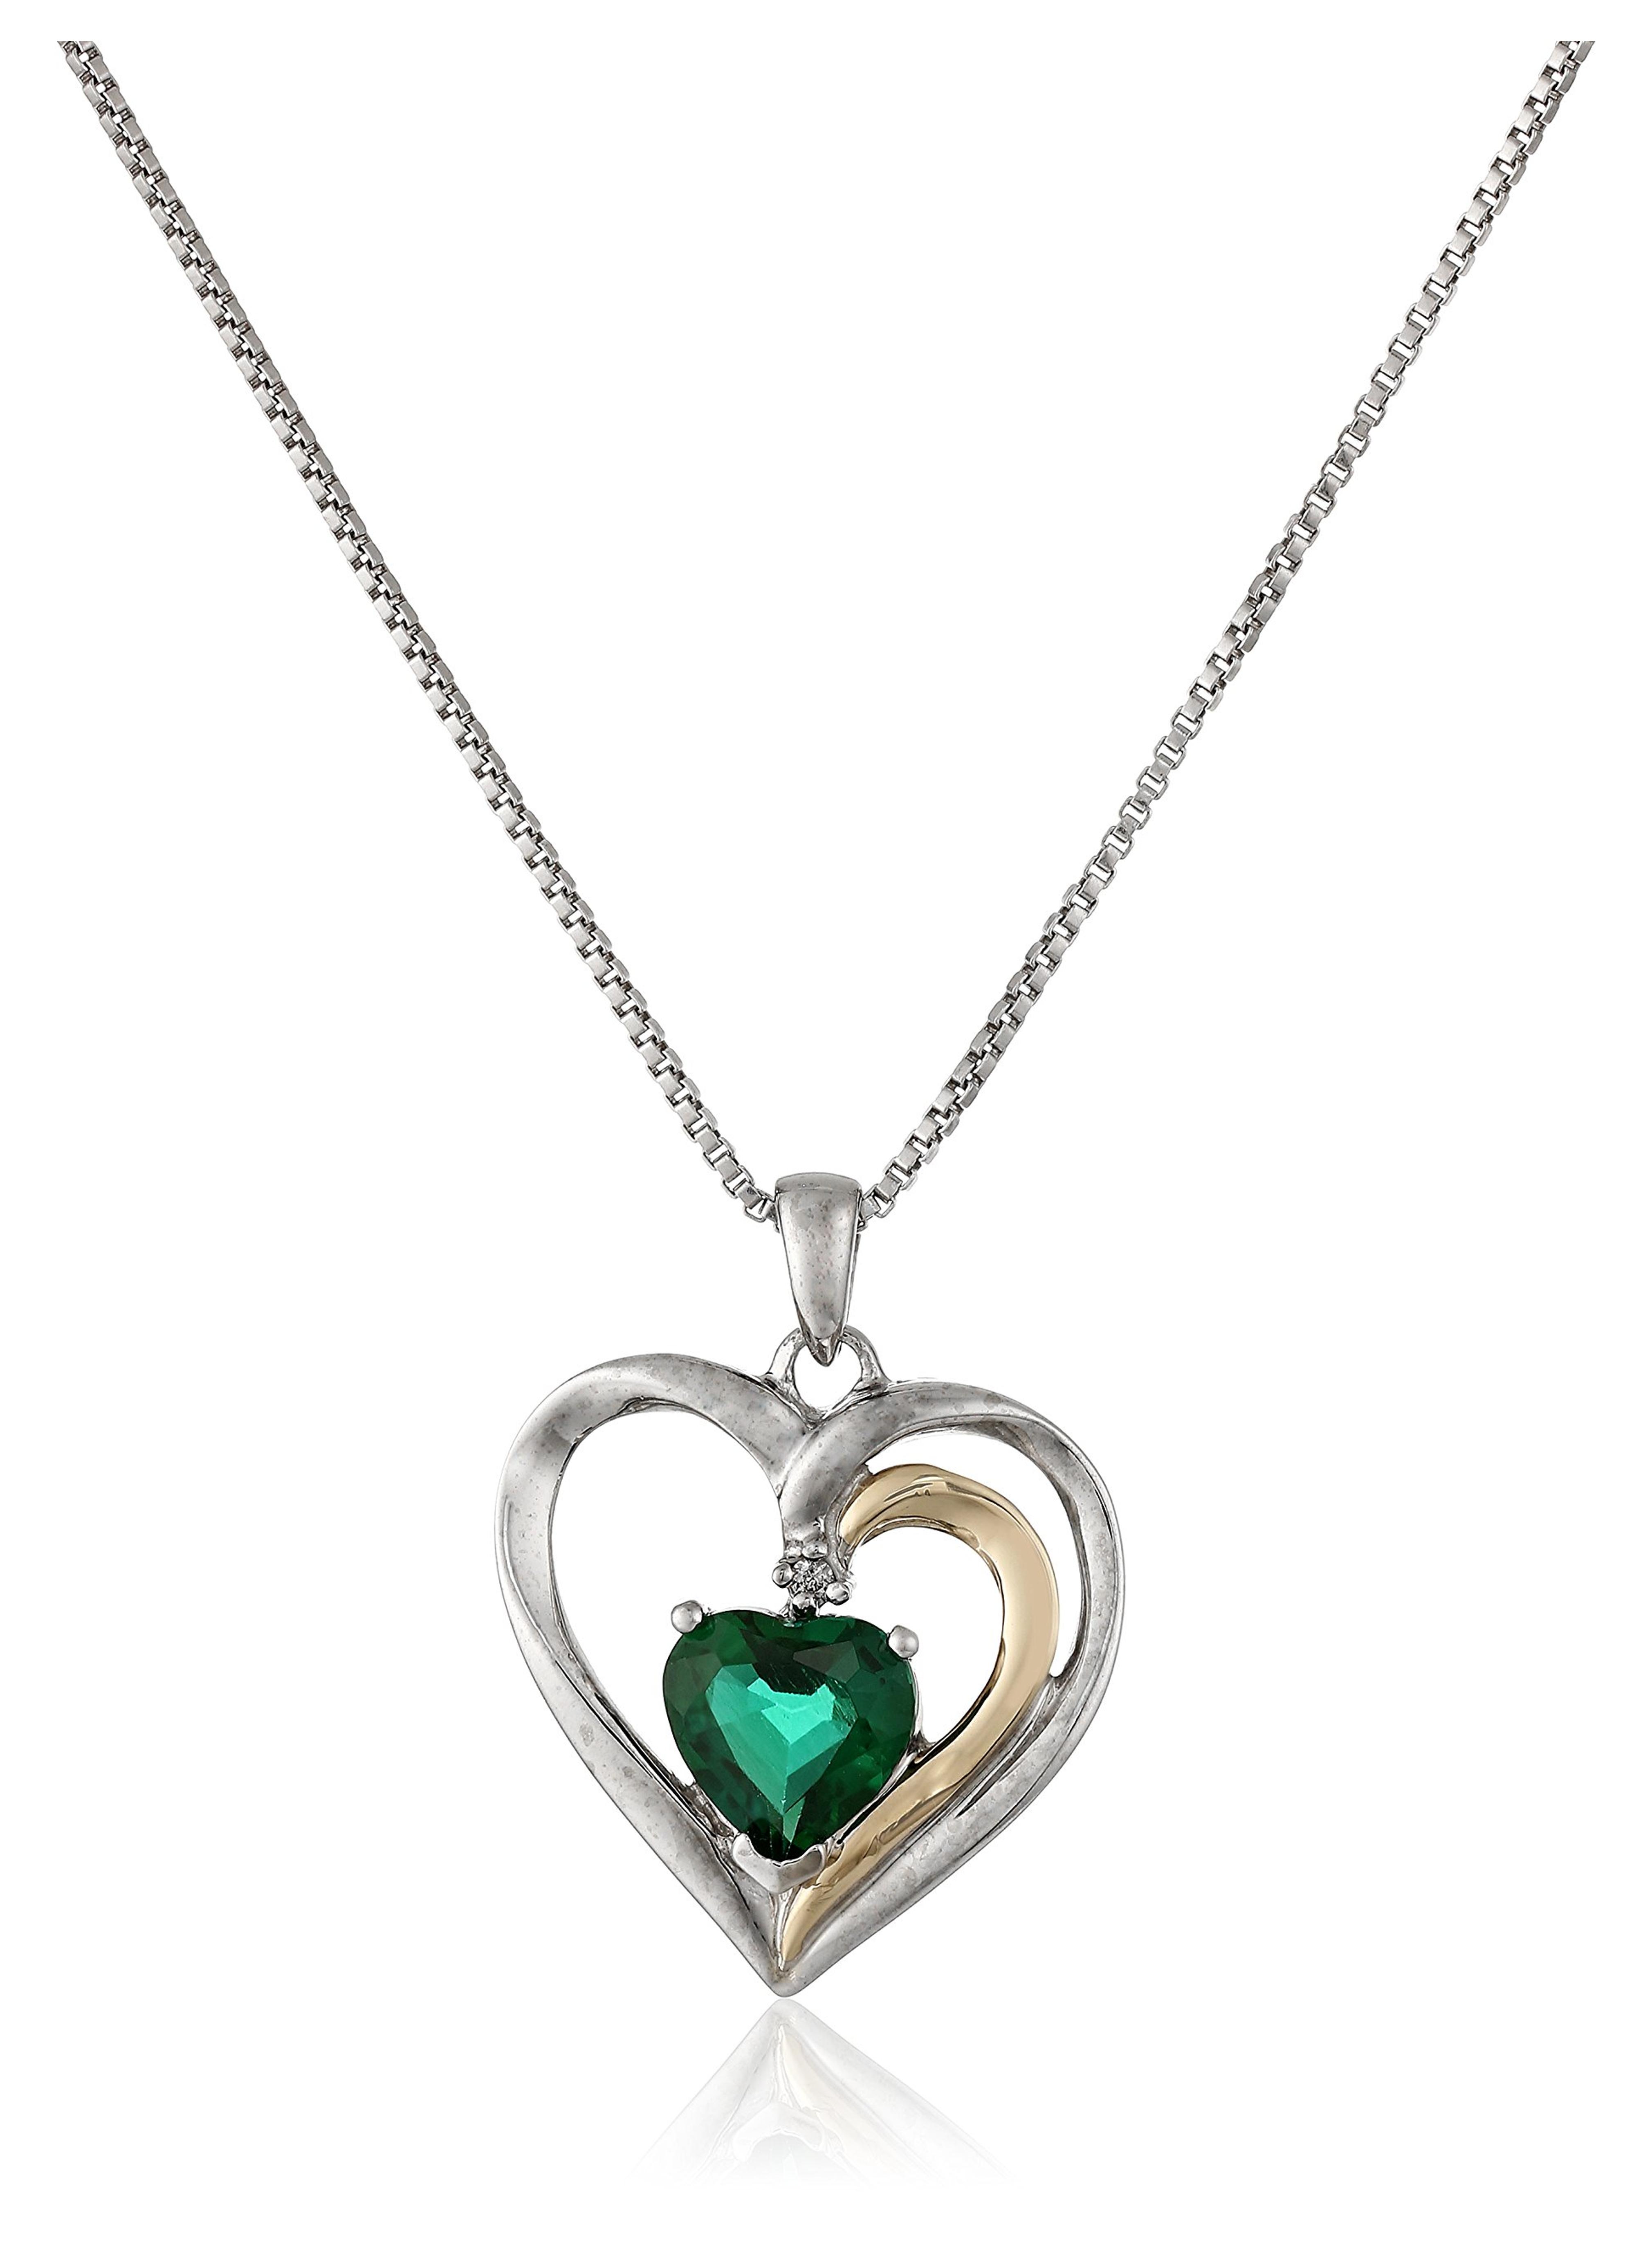 Sterling Silver and 14k Gold Created Emerald and Diamond Heart Pendant Necklace (.007 cttw, I-J Color, I2-I3 Clarity), 18" + 2" Extender